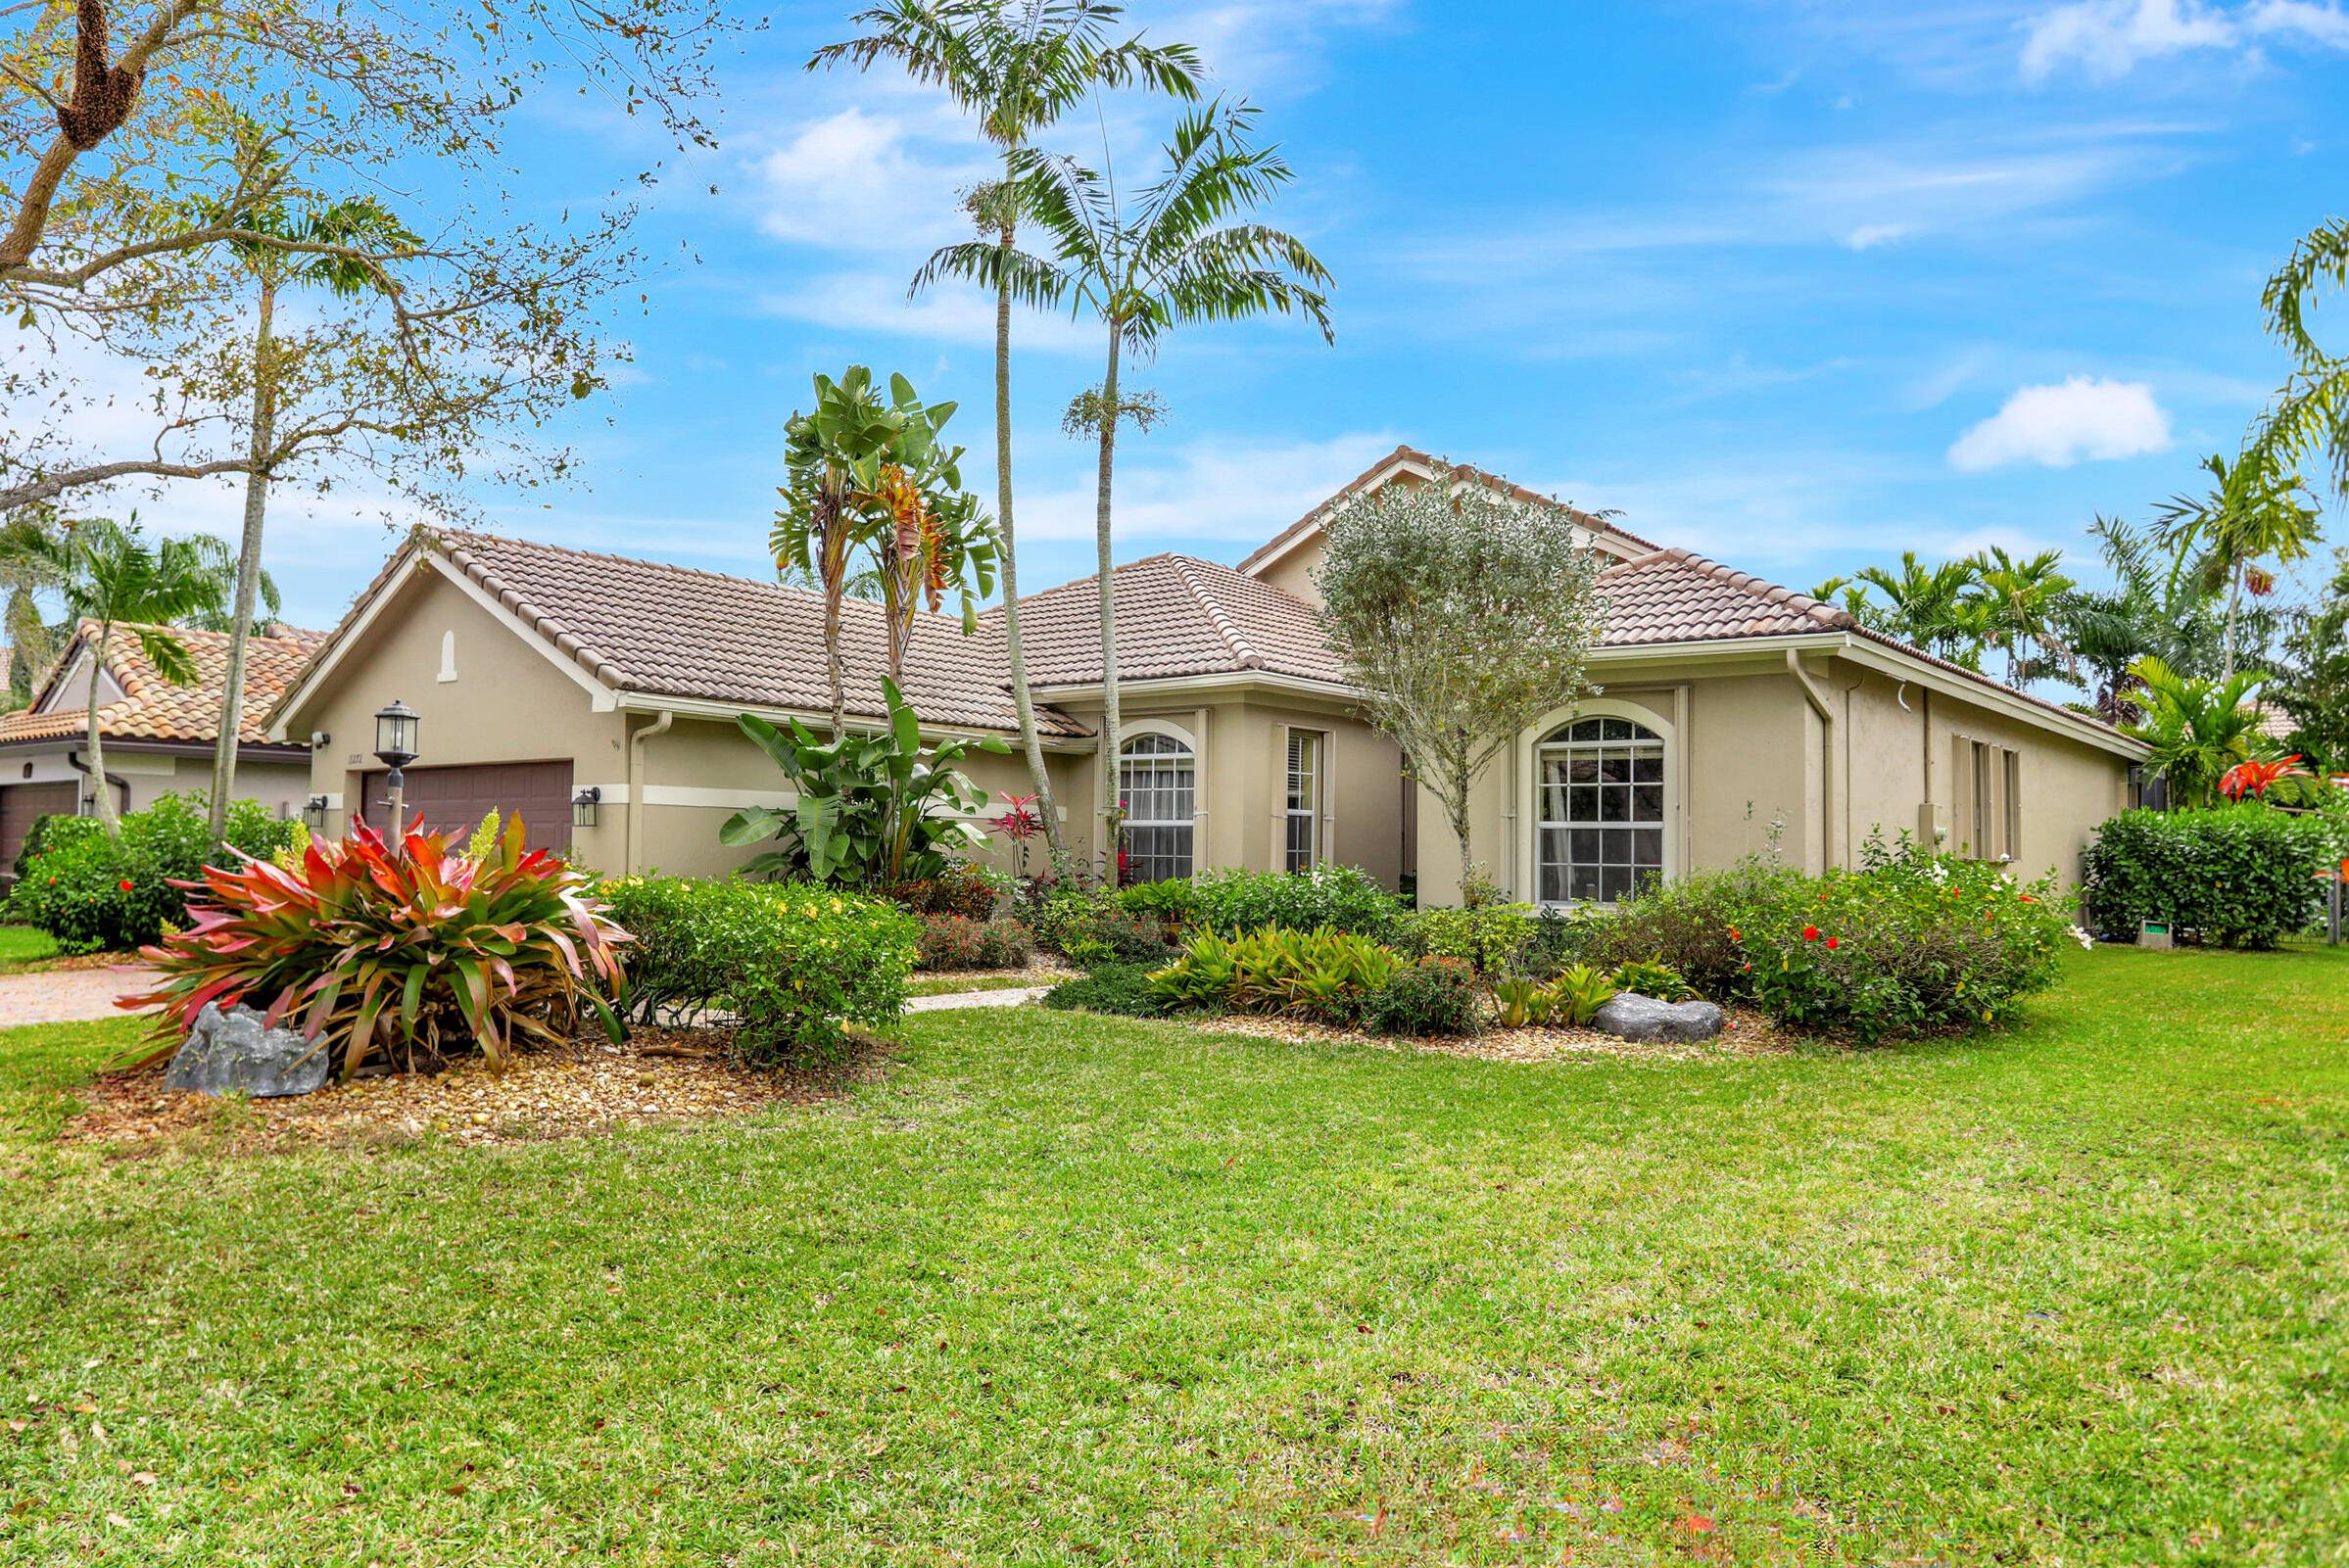 Gorgeous 5 br 3 ba Pool home in the lovely gated community of Parkland Isles.